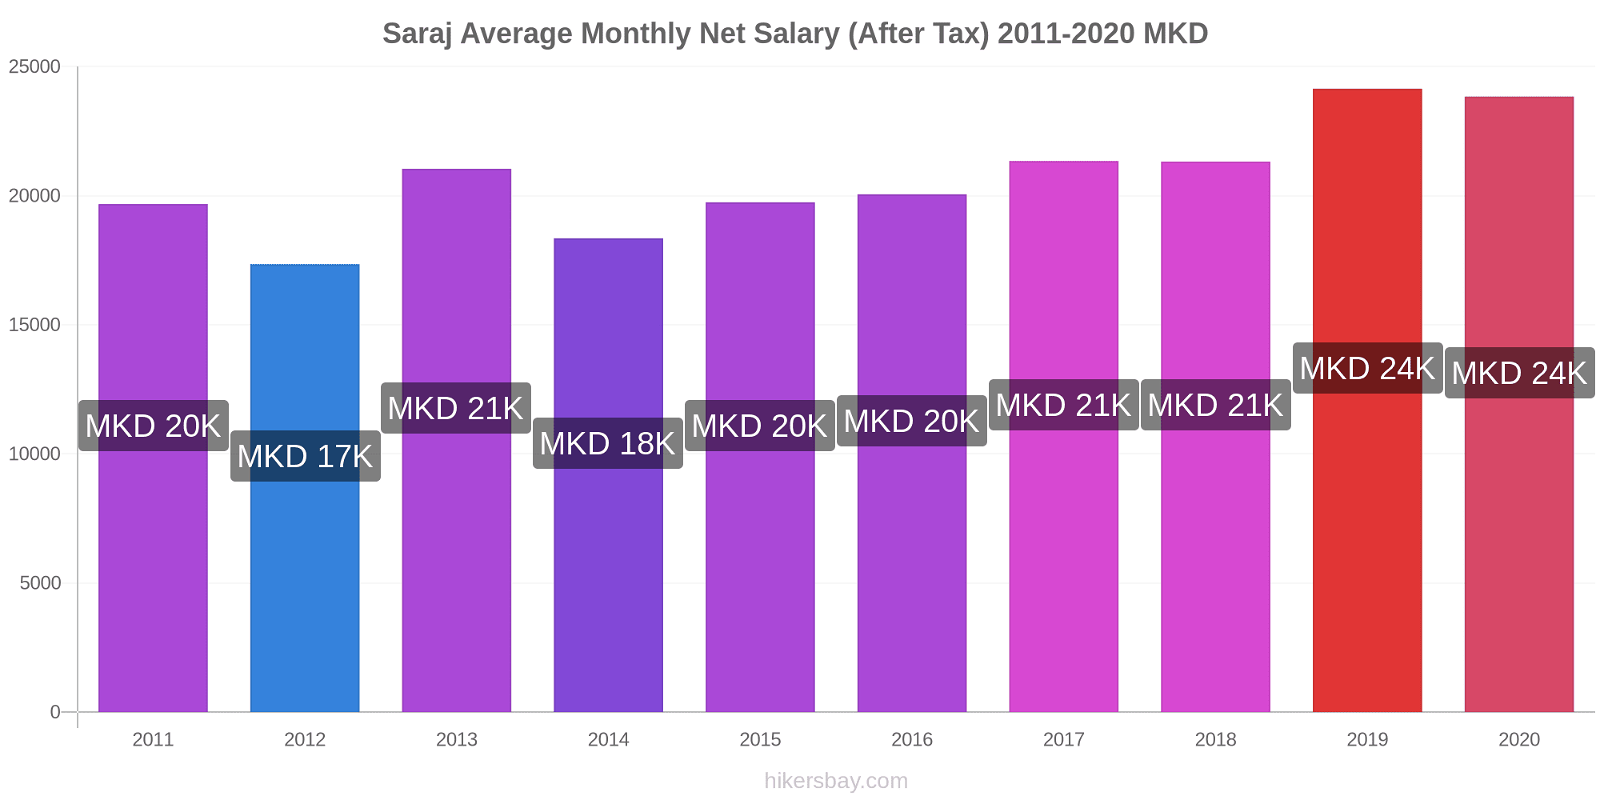 Saraj price changes Average Monthly Net Salary (After Tax) hikersbay.com